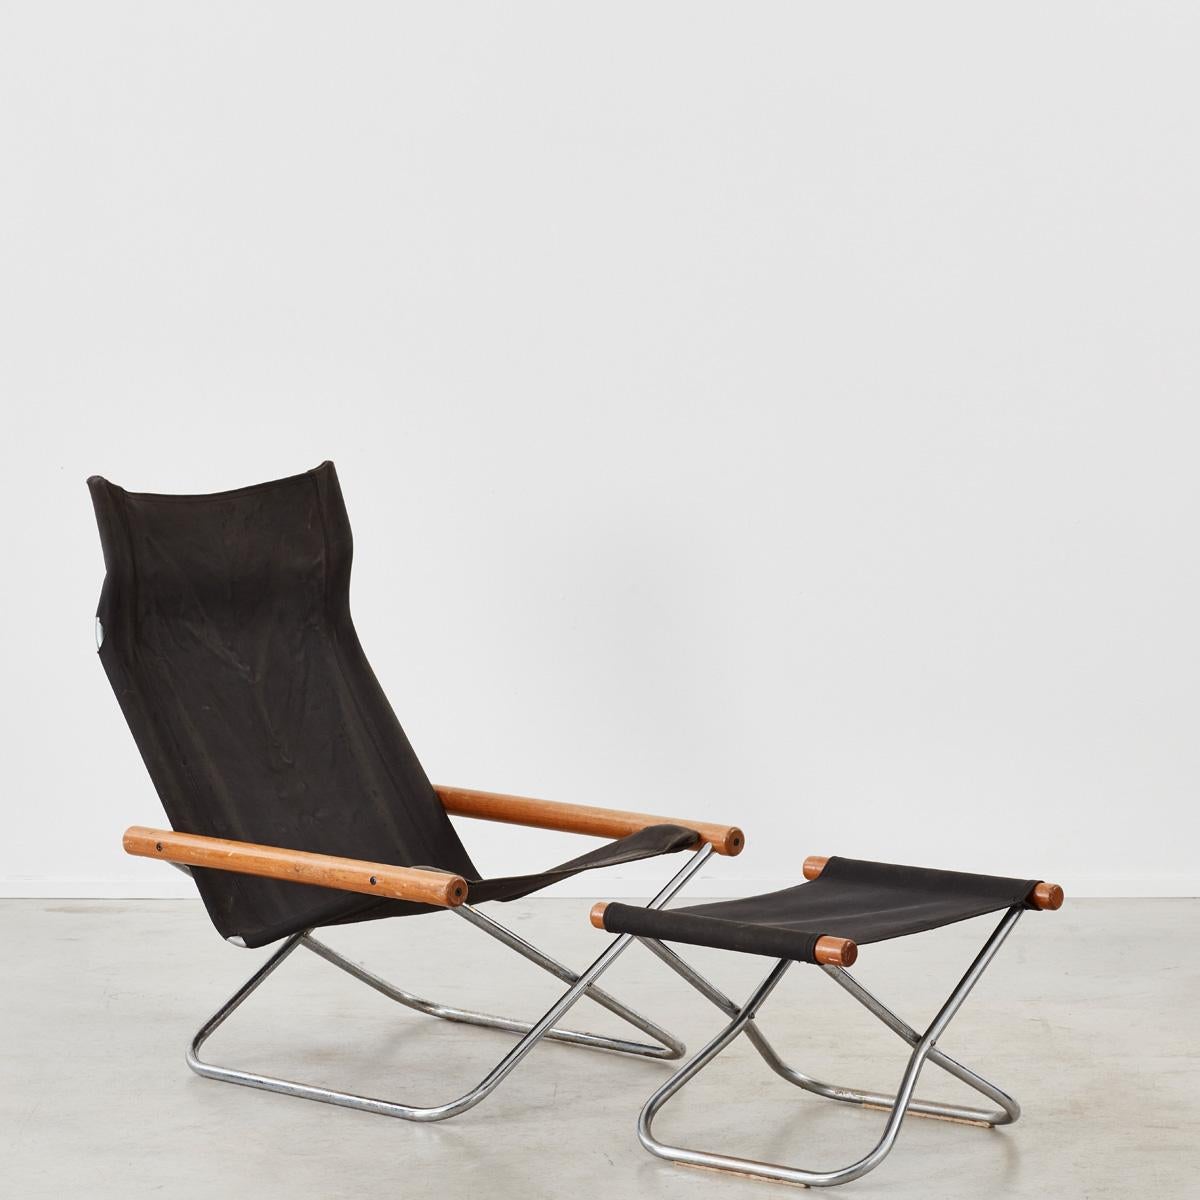 A winner of several design awards and a permanent part of the collection of MoMA, the ‘NY’ chair is a highly esteemed example of modern design. Created in 1958 by Japanese designer Takeshi Nii (1920-2007), the format of the chair was inspired by